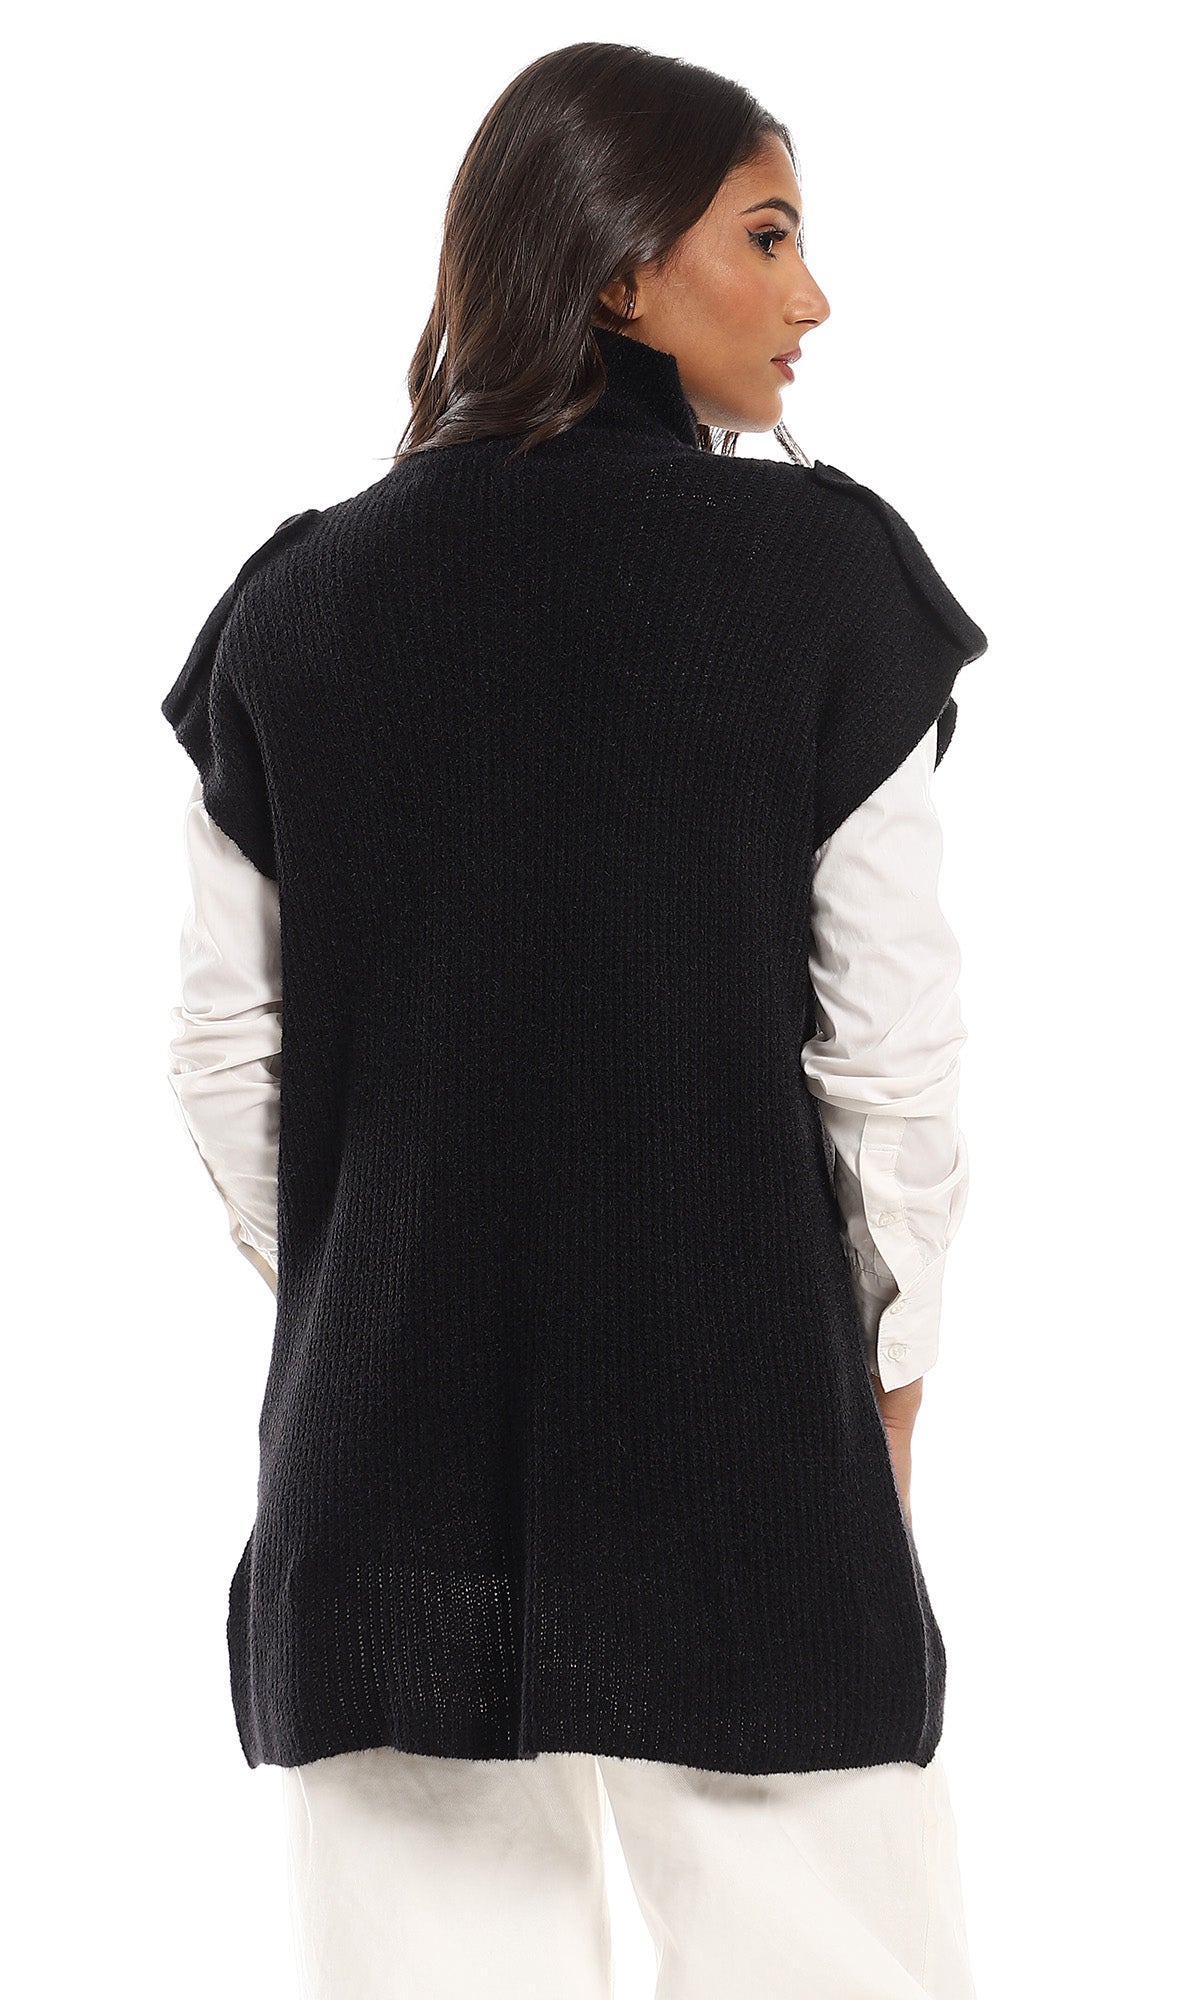 O151465 Acrylic Knitted High Neck Pullover - Black